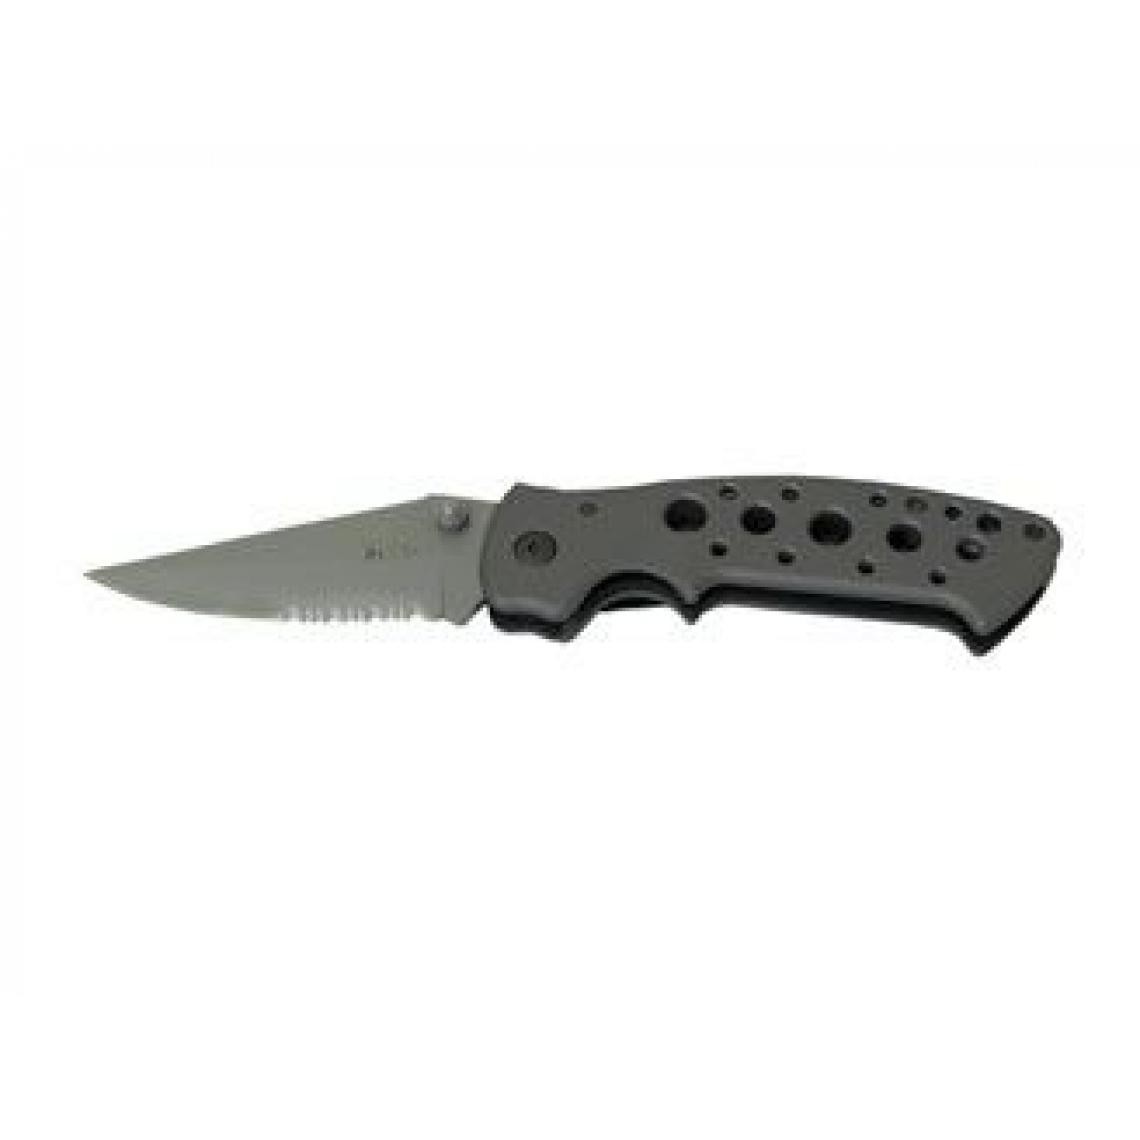 Crkt - Crkt PROFESSIONAL SMALL 7782 COMBO - Outils de coupe